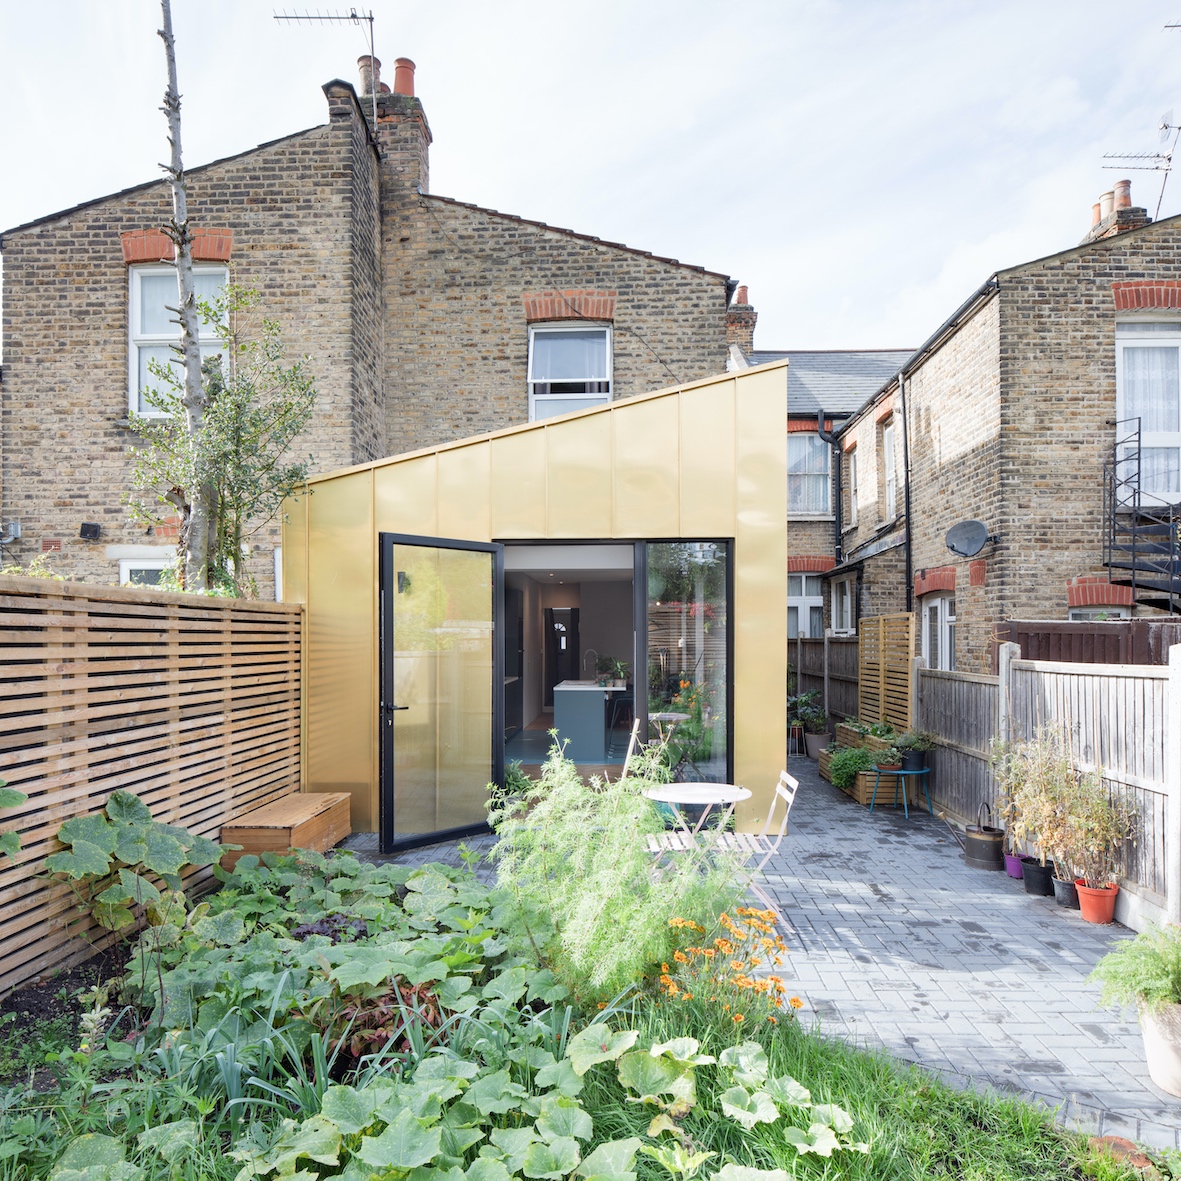 JAMES DALE ARCHITECTS DELIVER A GLIMMERING GOLD EXTENSION